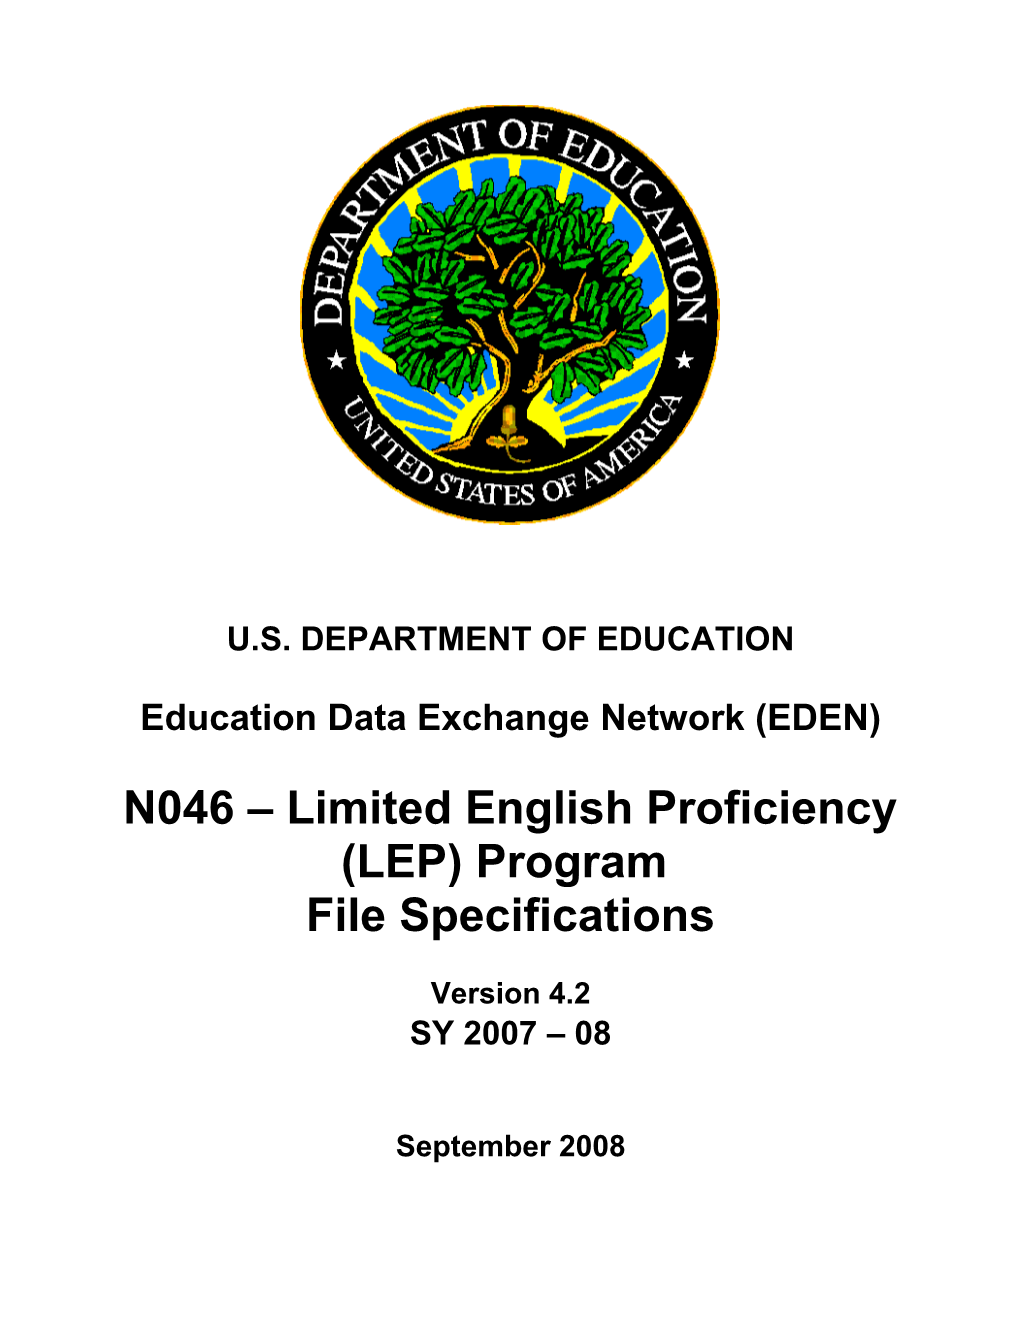 Limited English Proficiency (LEP) Program File Specifications Version 4.2 (MS Word)